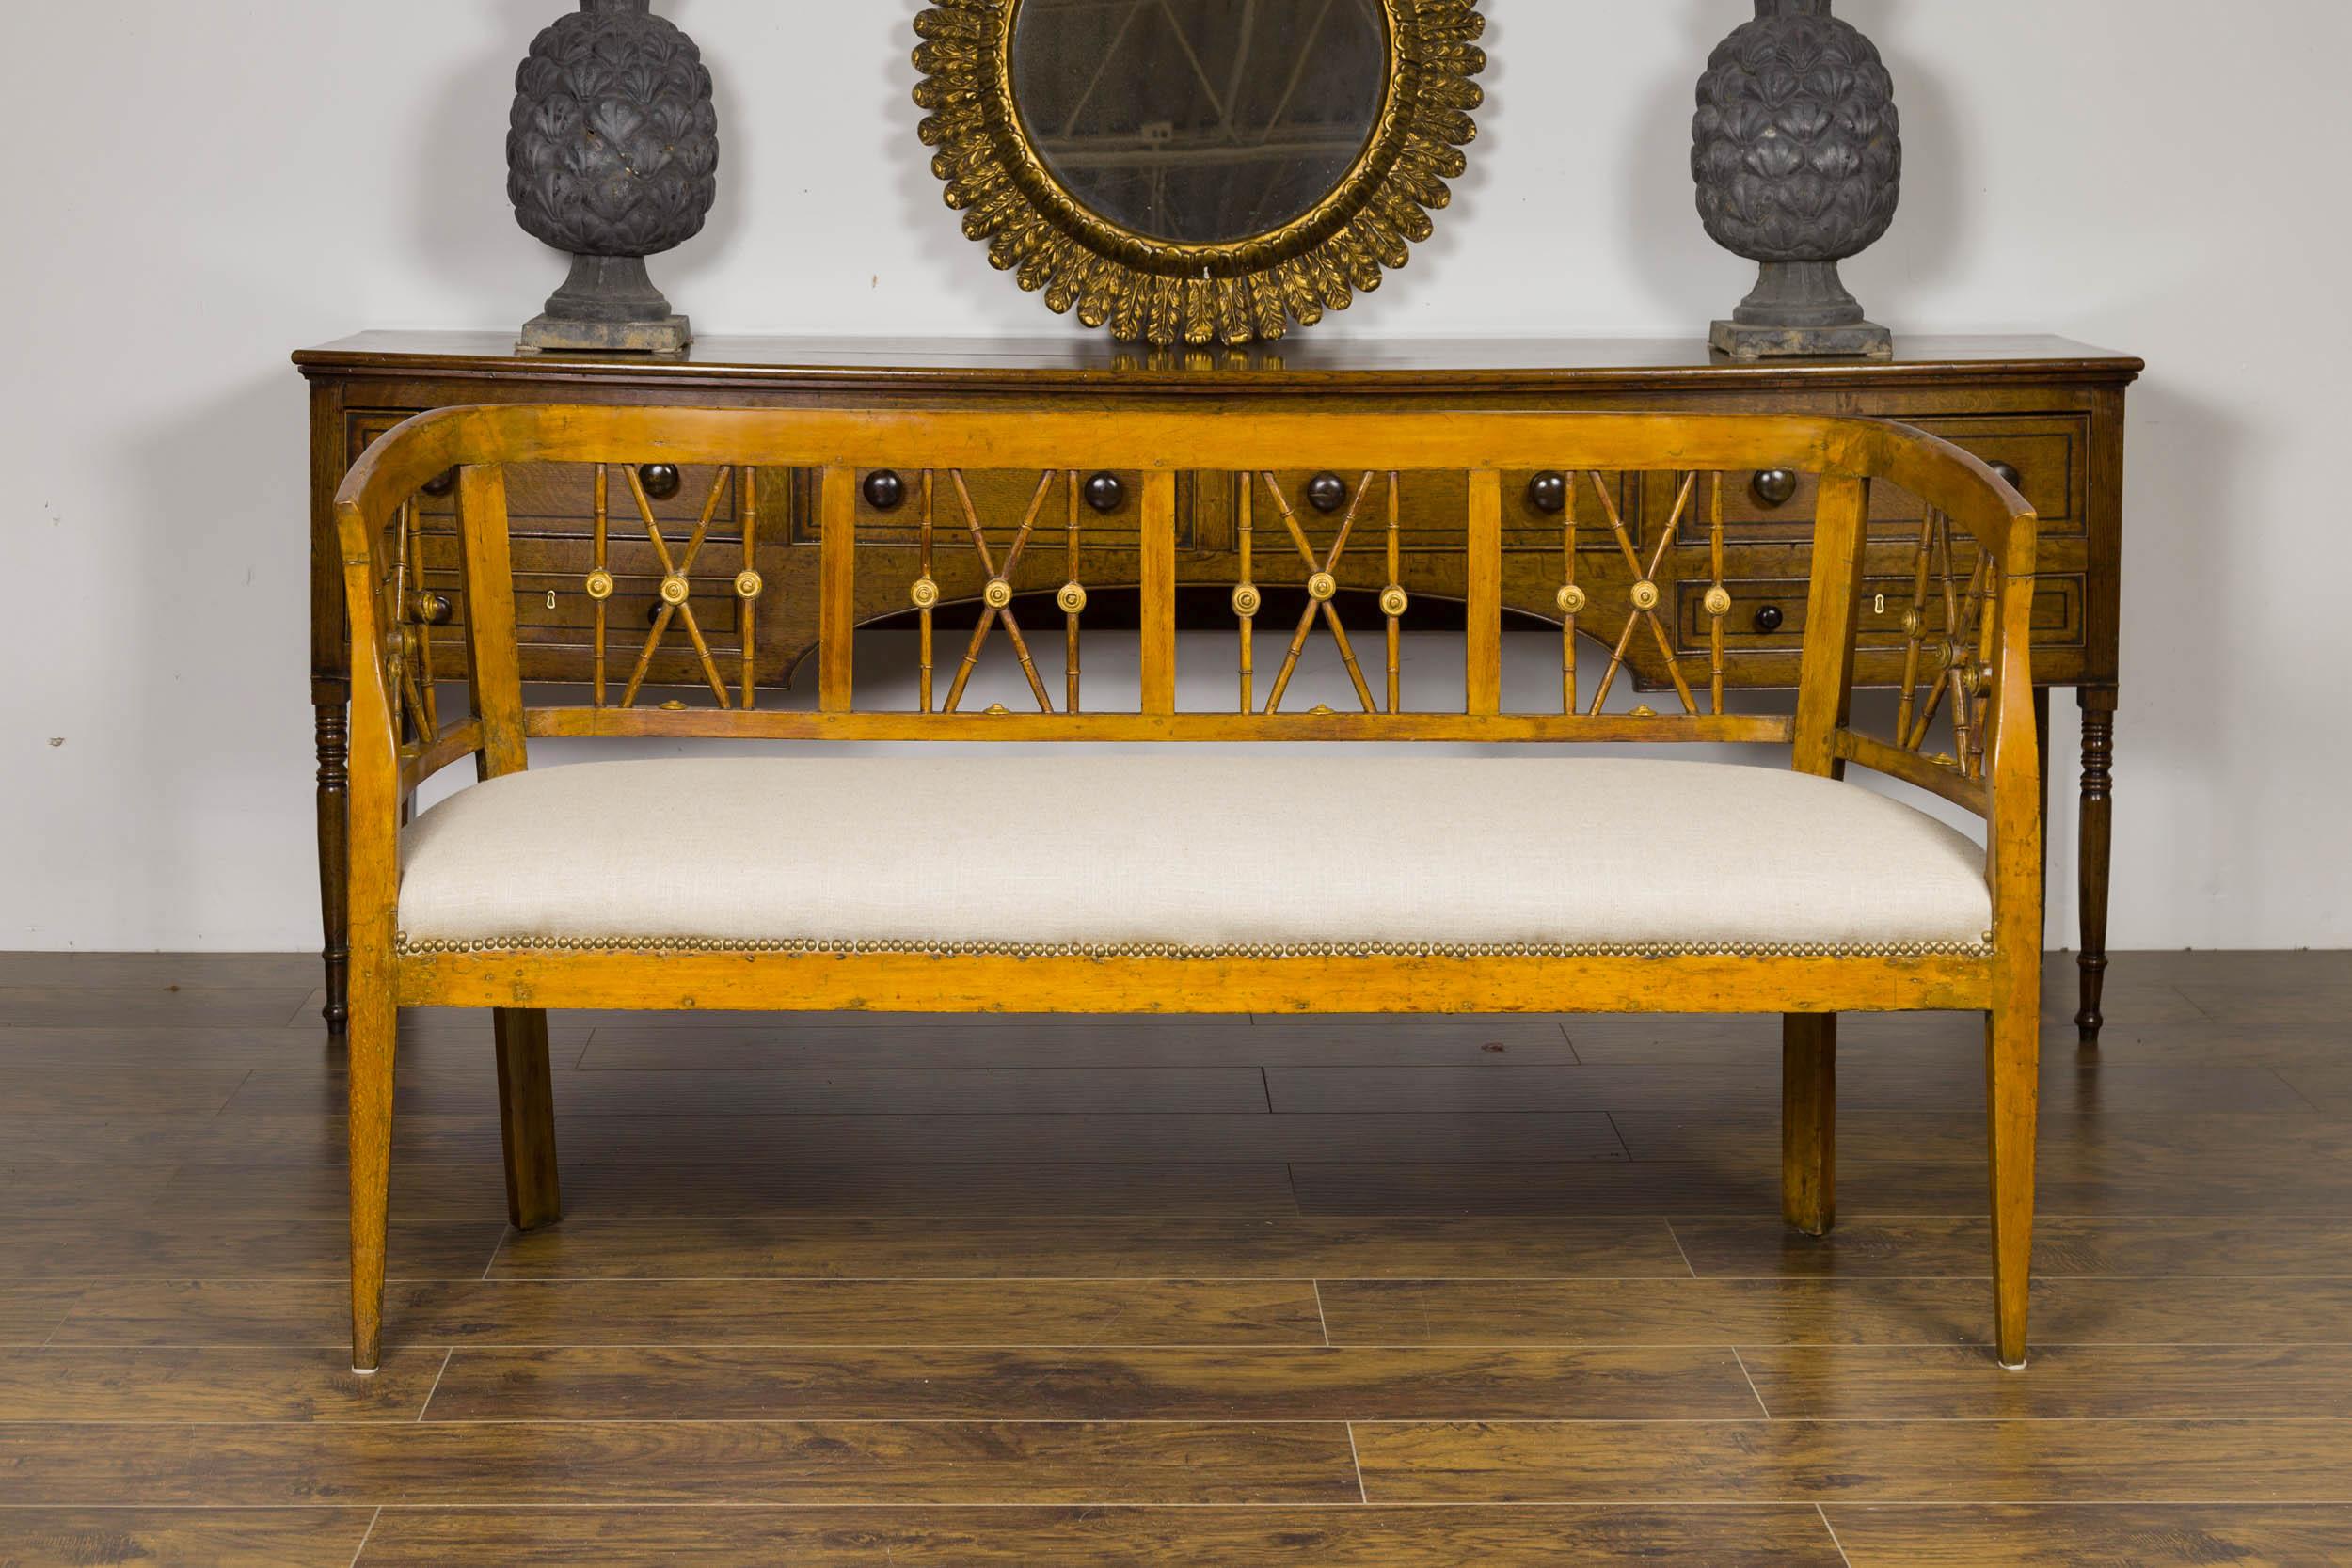 An Italian walnut settee from the early 19th century, with X motifs, gilded medallions and new upholstery. Born in Italy during the first quarter of the 19th century, this walnut settee features a pierced back, accented with X motifs and gilded